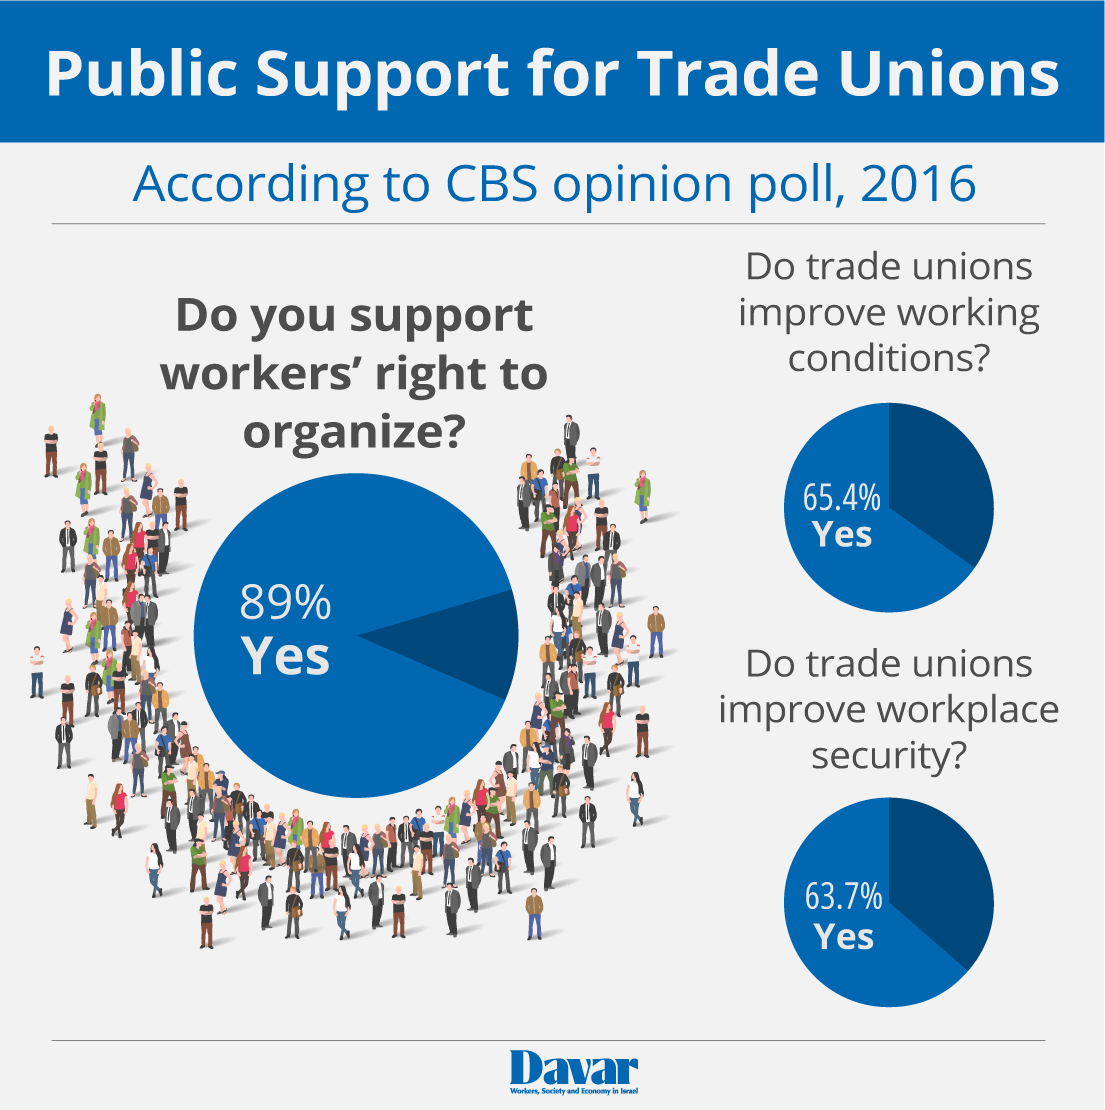 Public Support for Trade UnionsAccording to CBS (Central bureau of statistics) opinion poll, 2016 (Graphics: Davar)